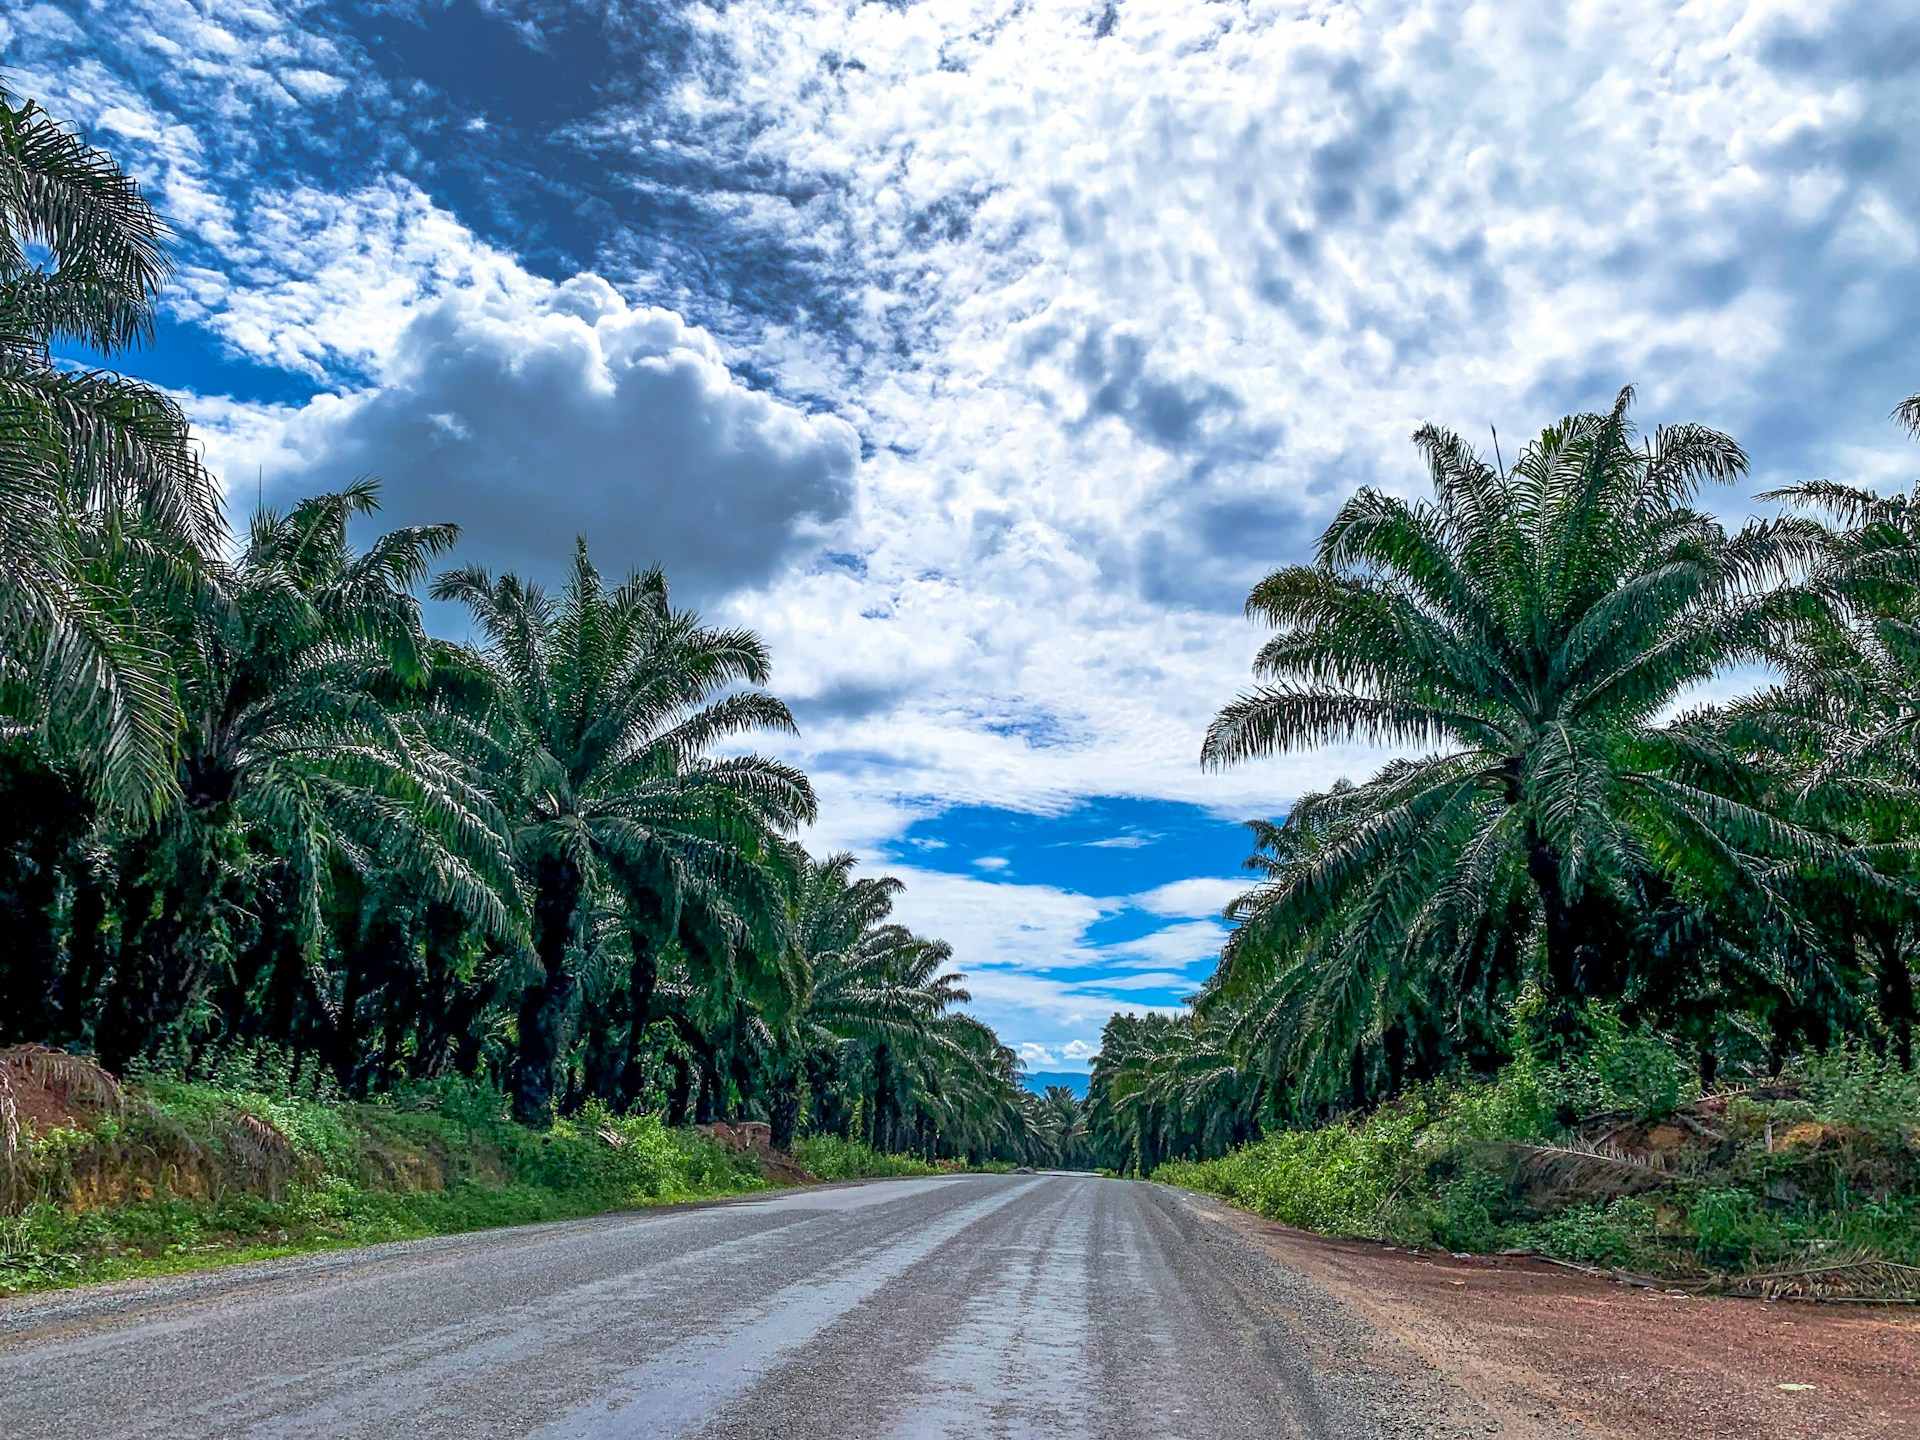 green palm trees near road under white clouds and blue sky during daytime